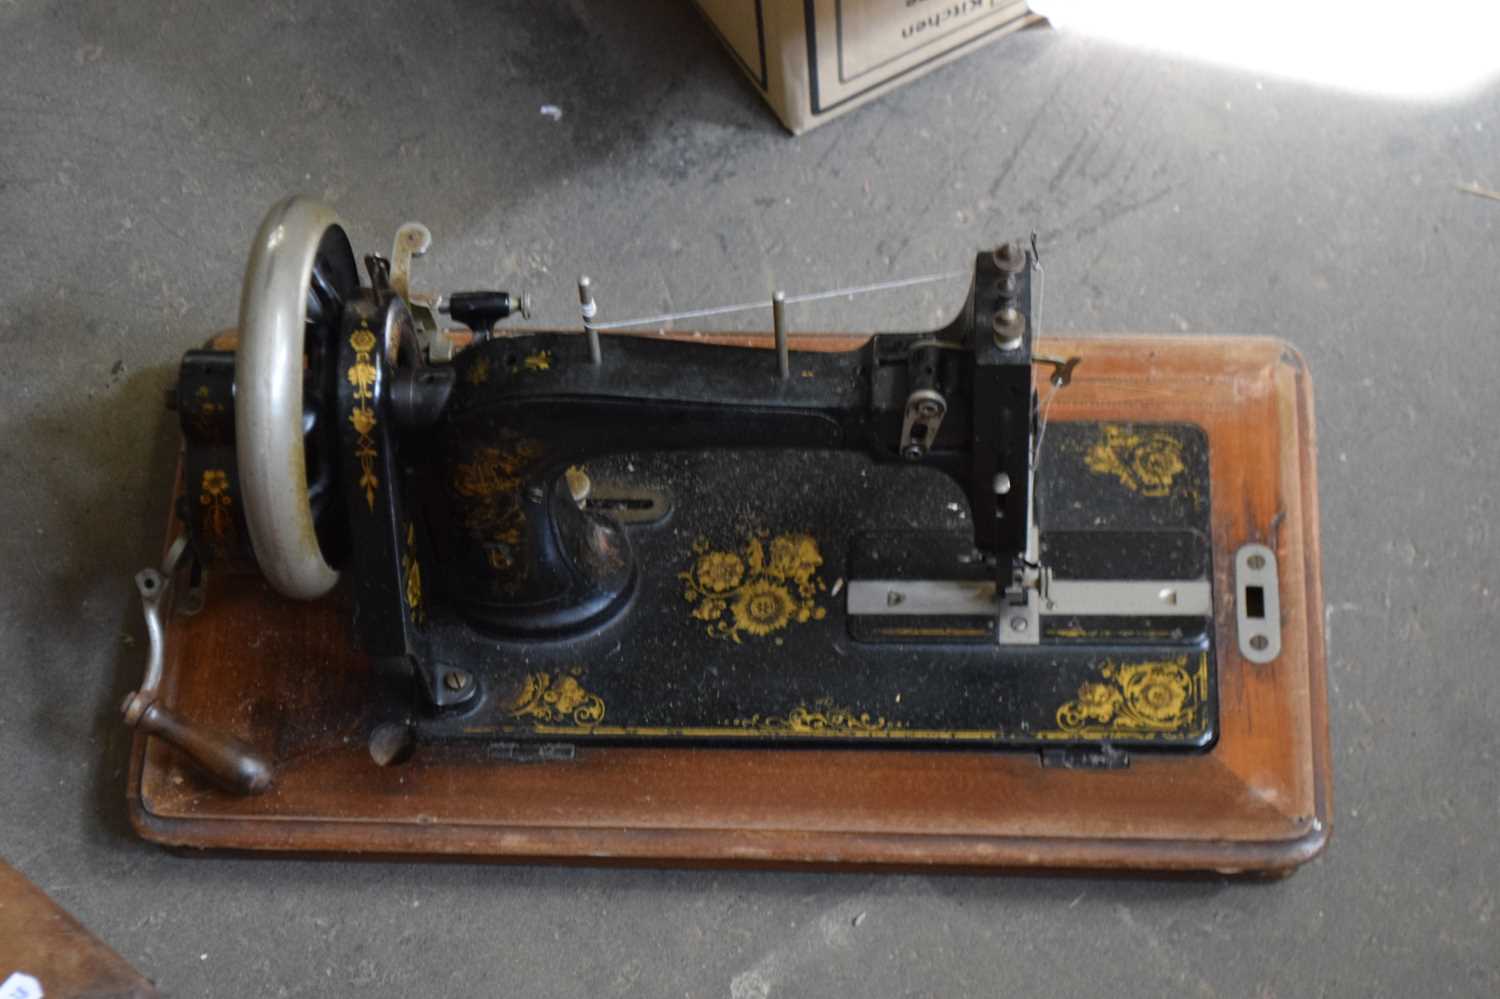 PFAFF MODEL B SEWING MACHINE IN WOODEN CASE - Image 2 of 2